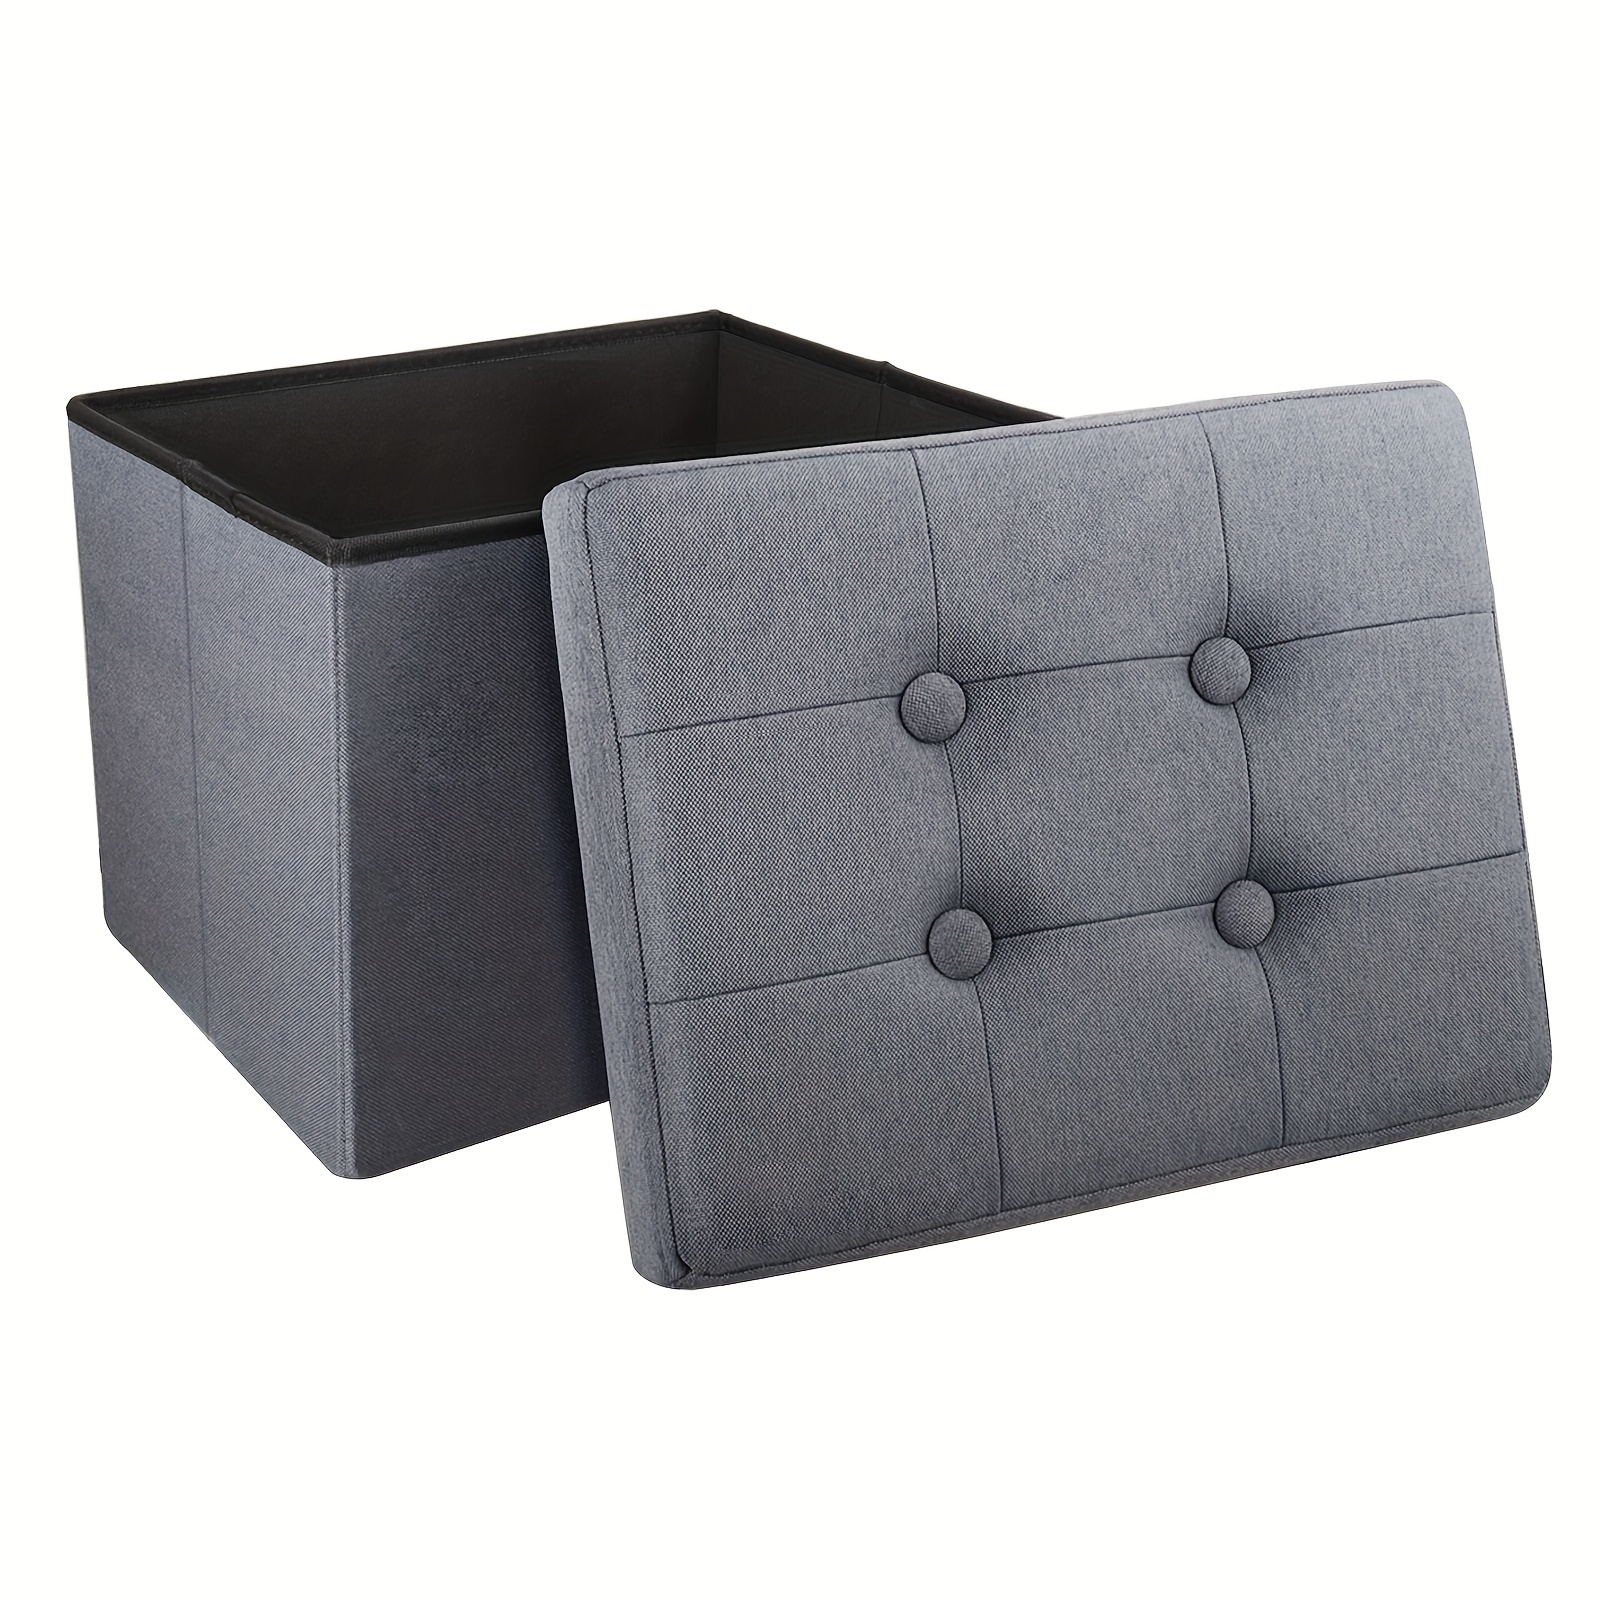 

Storage Ottoman, Folding Foot Stool With Thicker Foam Padded Seat Small Storage Ottoman Bench Foot Rest For Living Room Foldable Coffee Table 17x13x13inch